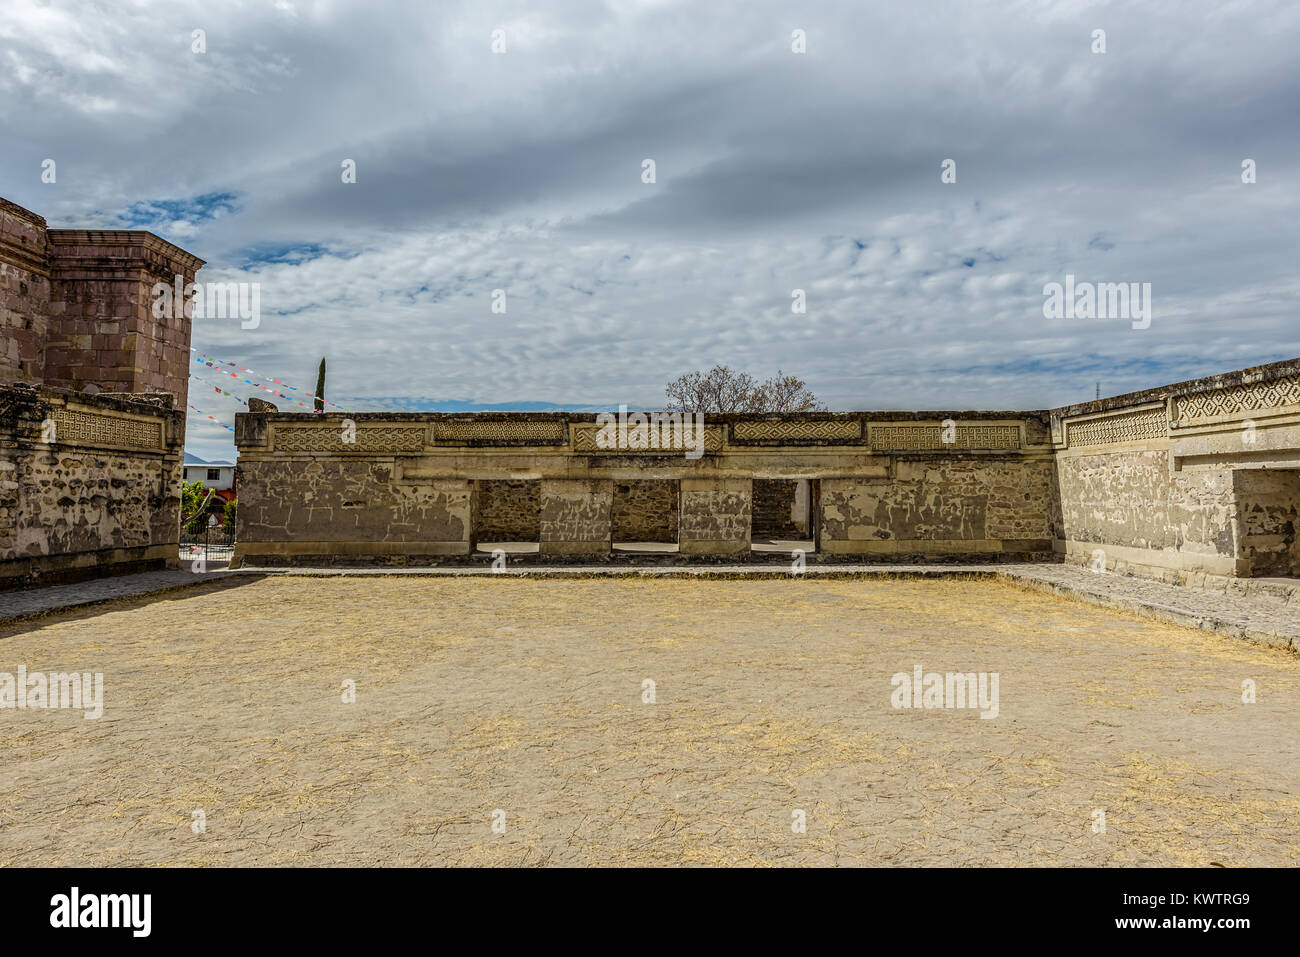 Historical monument in the ancient Mesoamerican city of Mitla Mexico Stock Photo